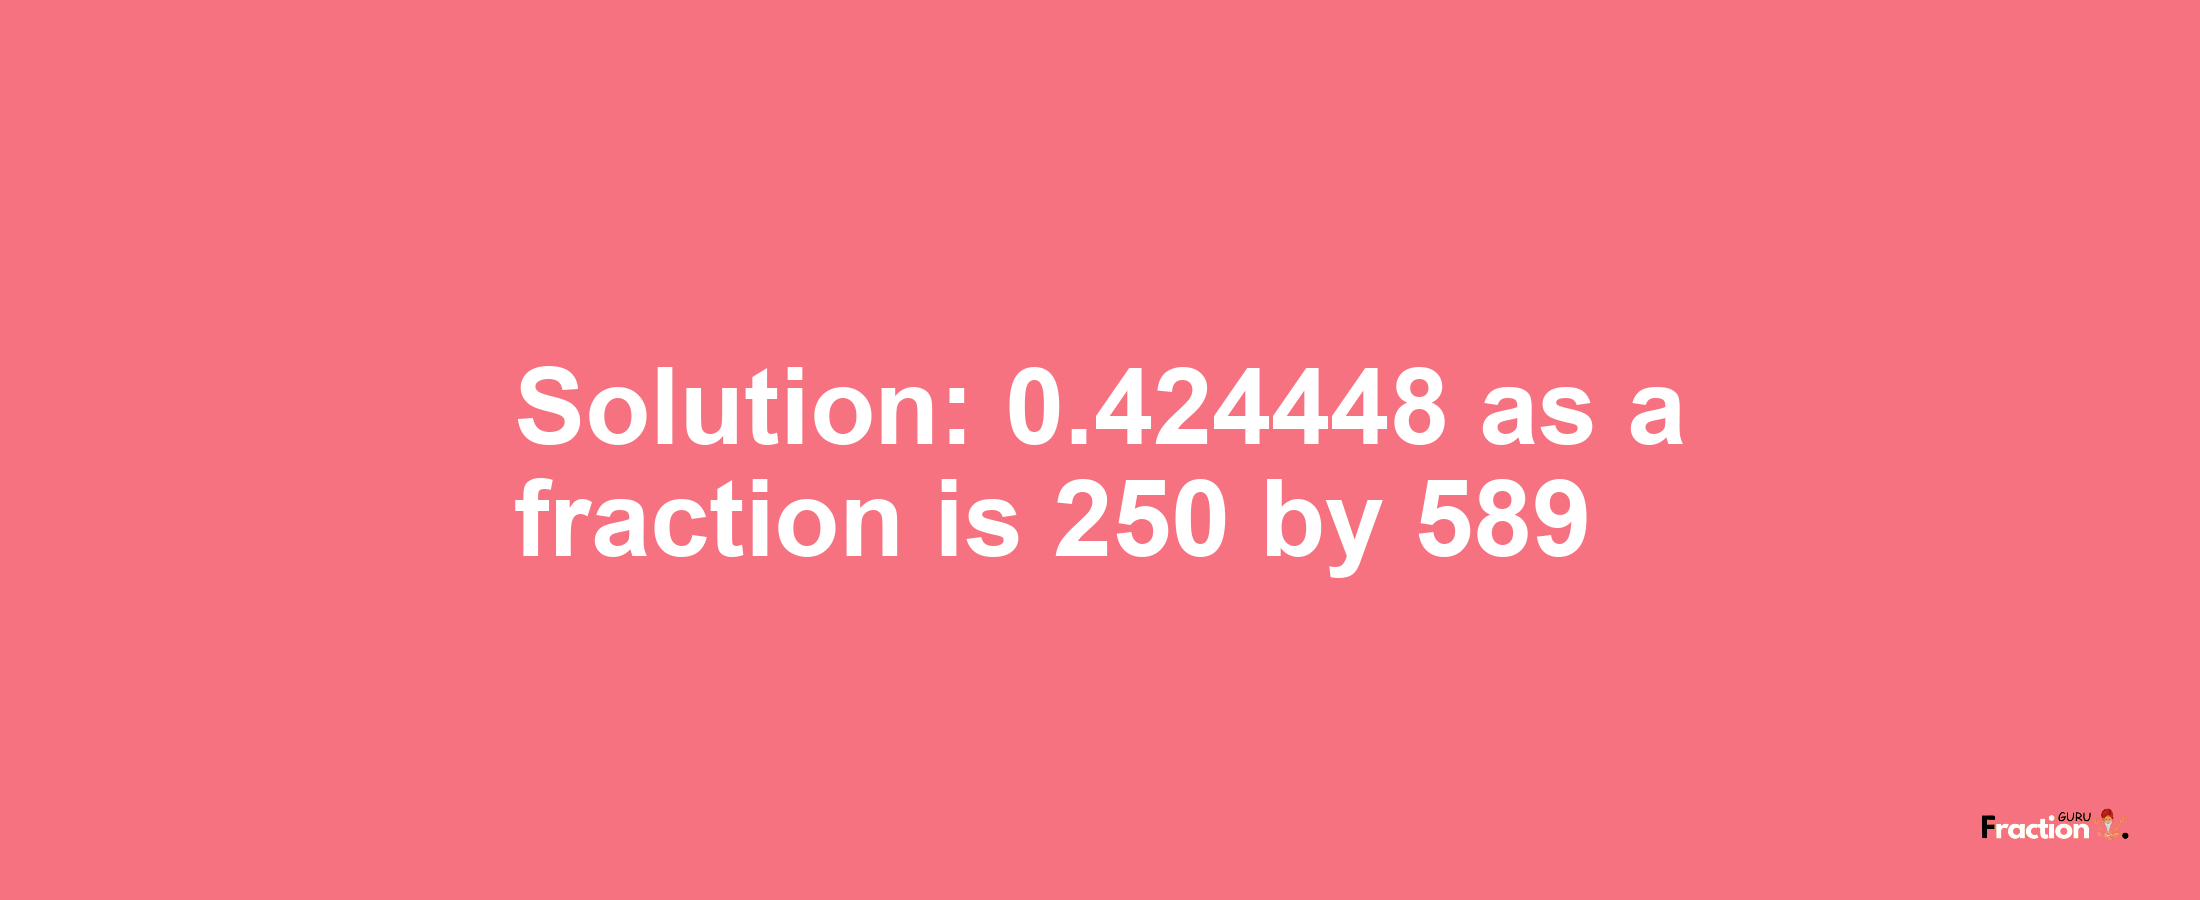 Solution:0.424448 as a fraction is 250/589